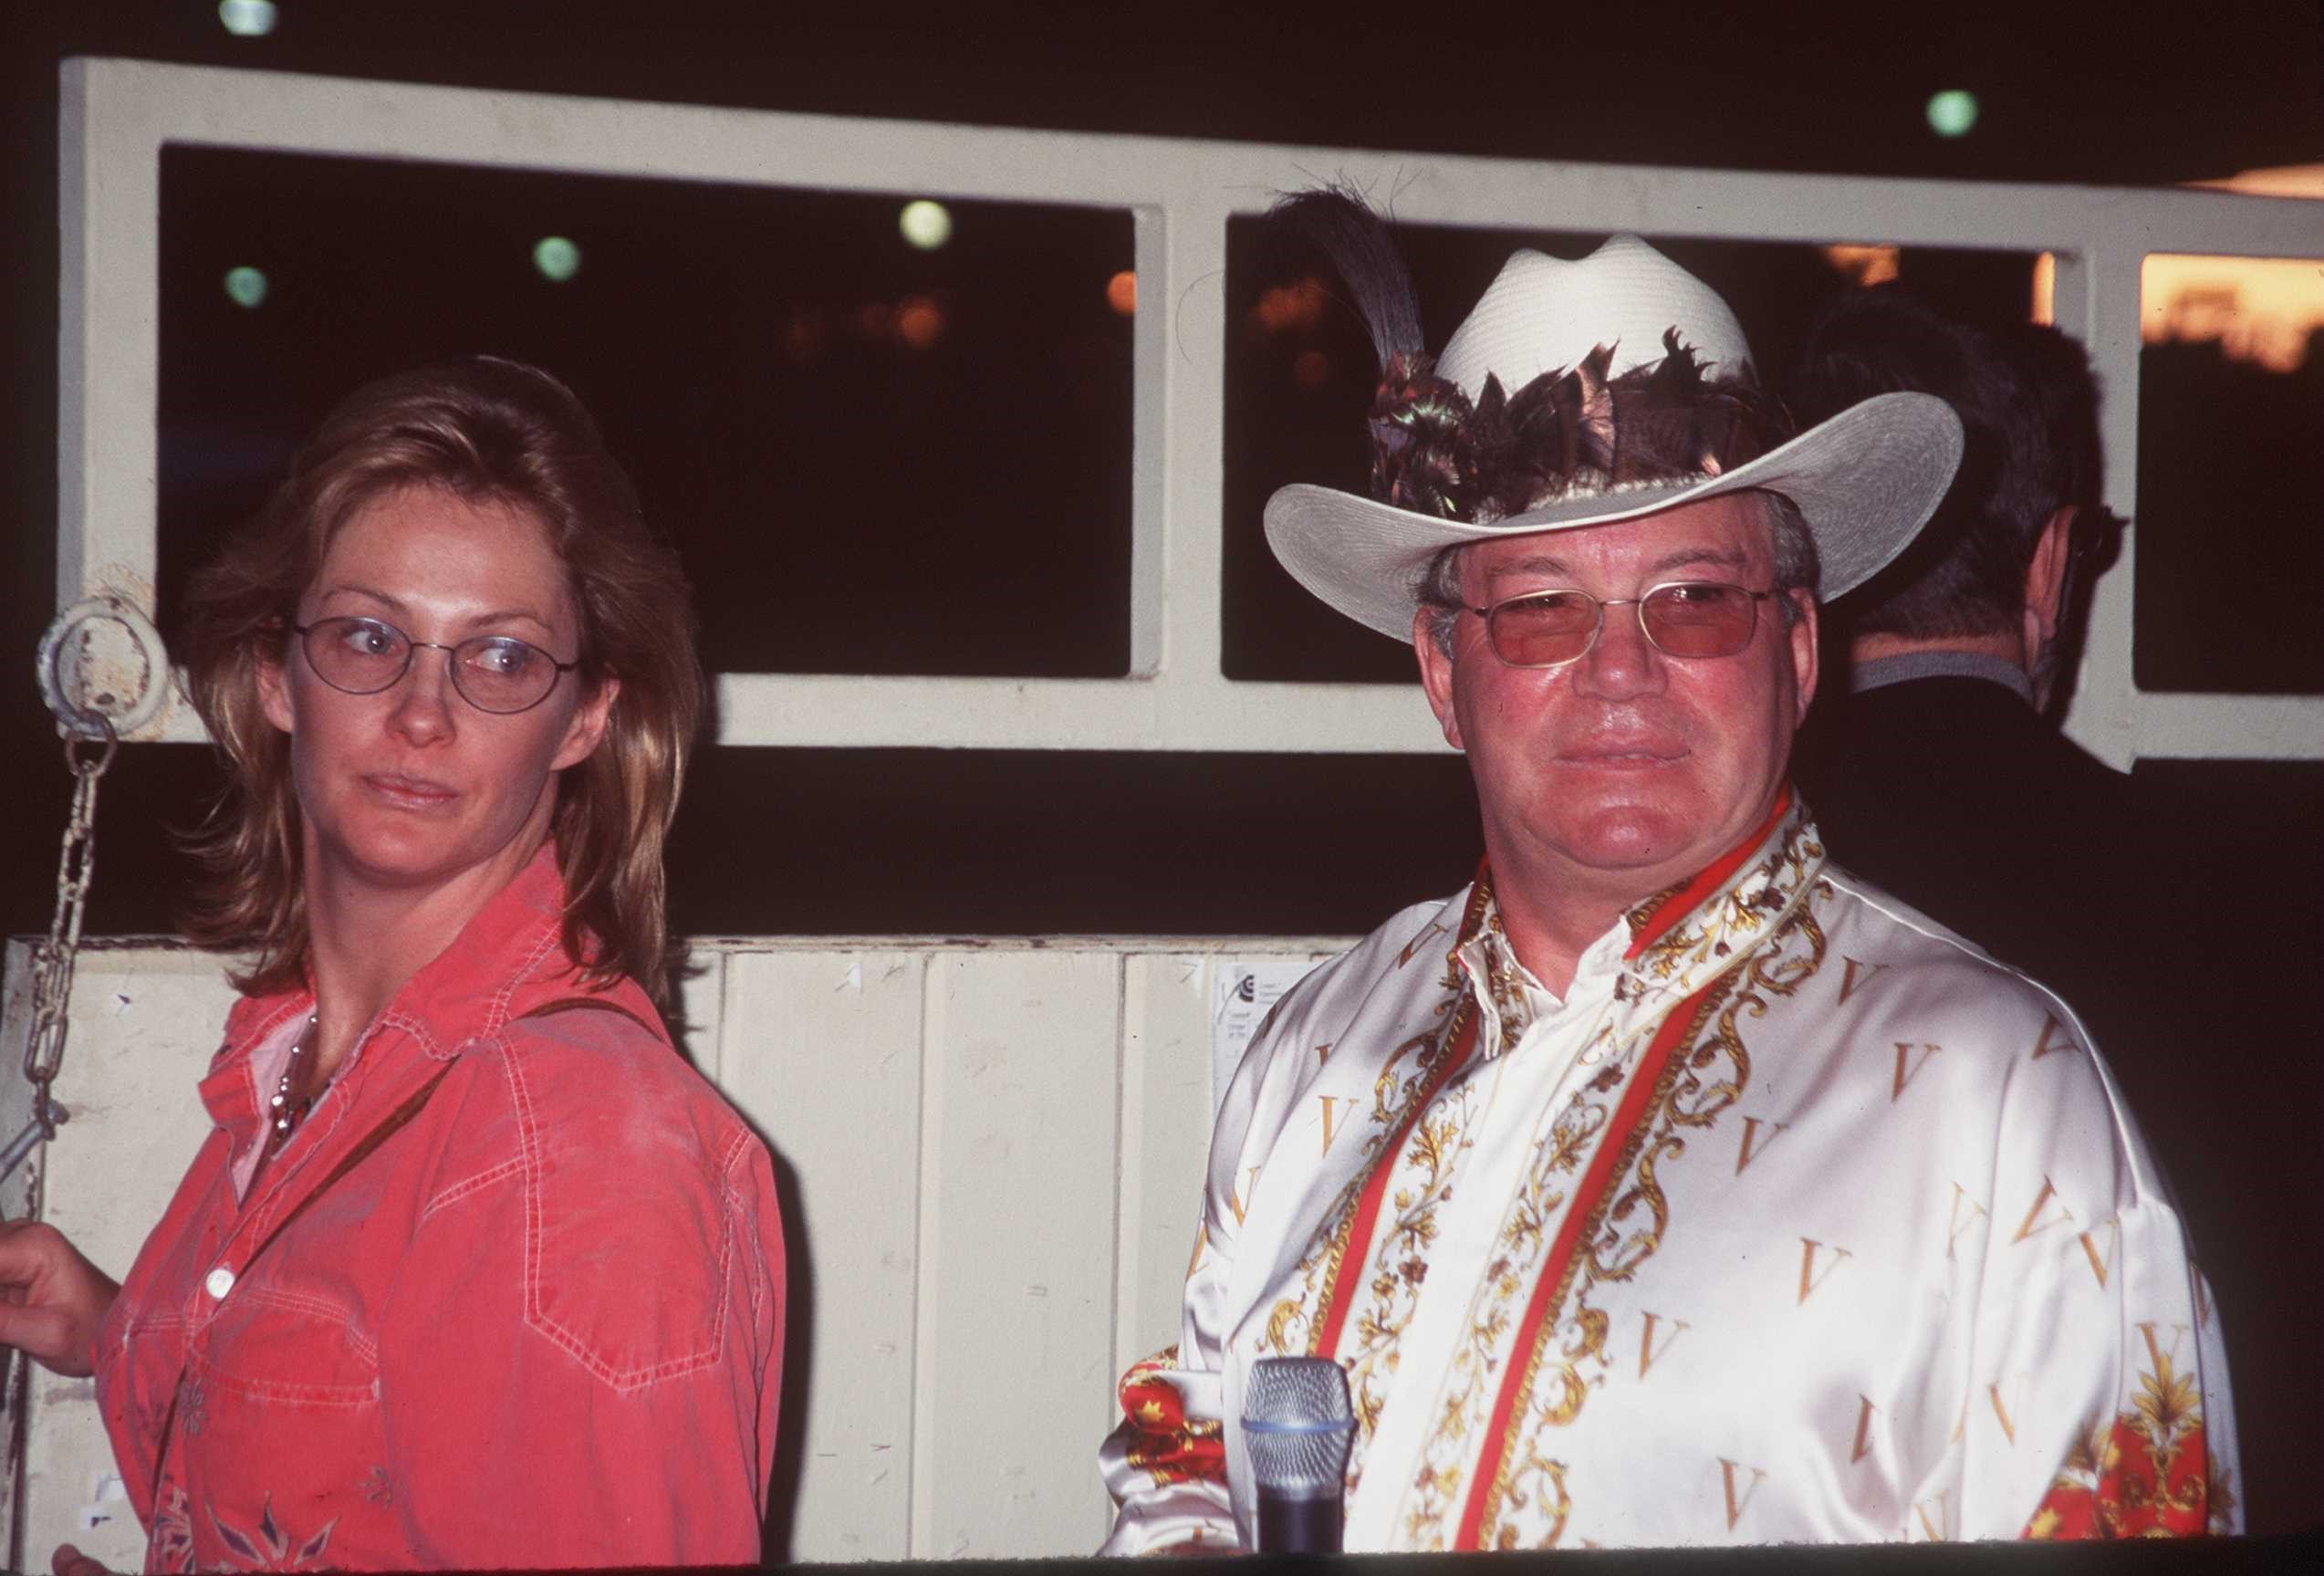 William Shatner and Nerine Kidd to host the 7th annual Hollywood Charity Horse Show $20,000 Reining Royale on April 28, 1997. | Source: Getty Images